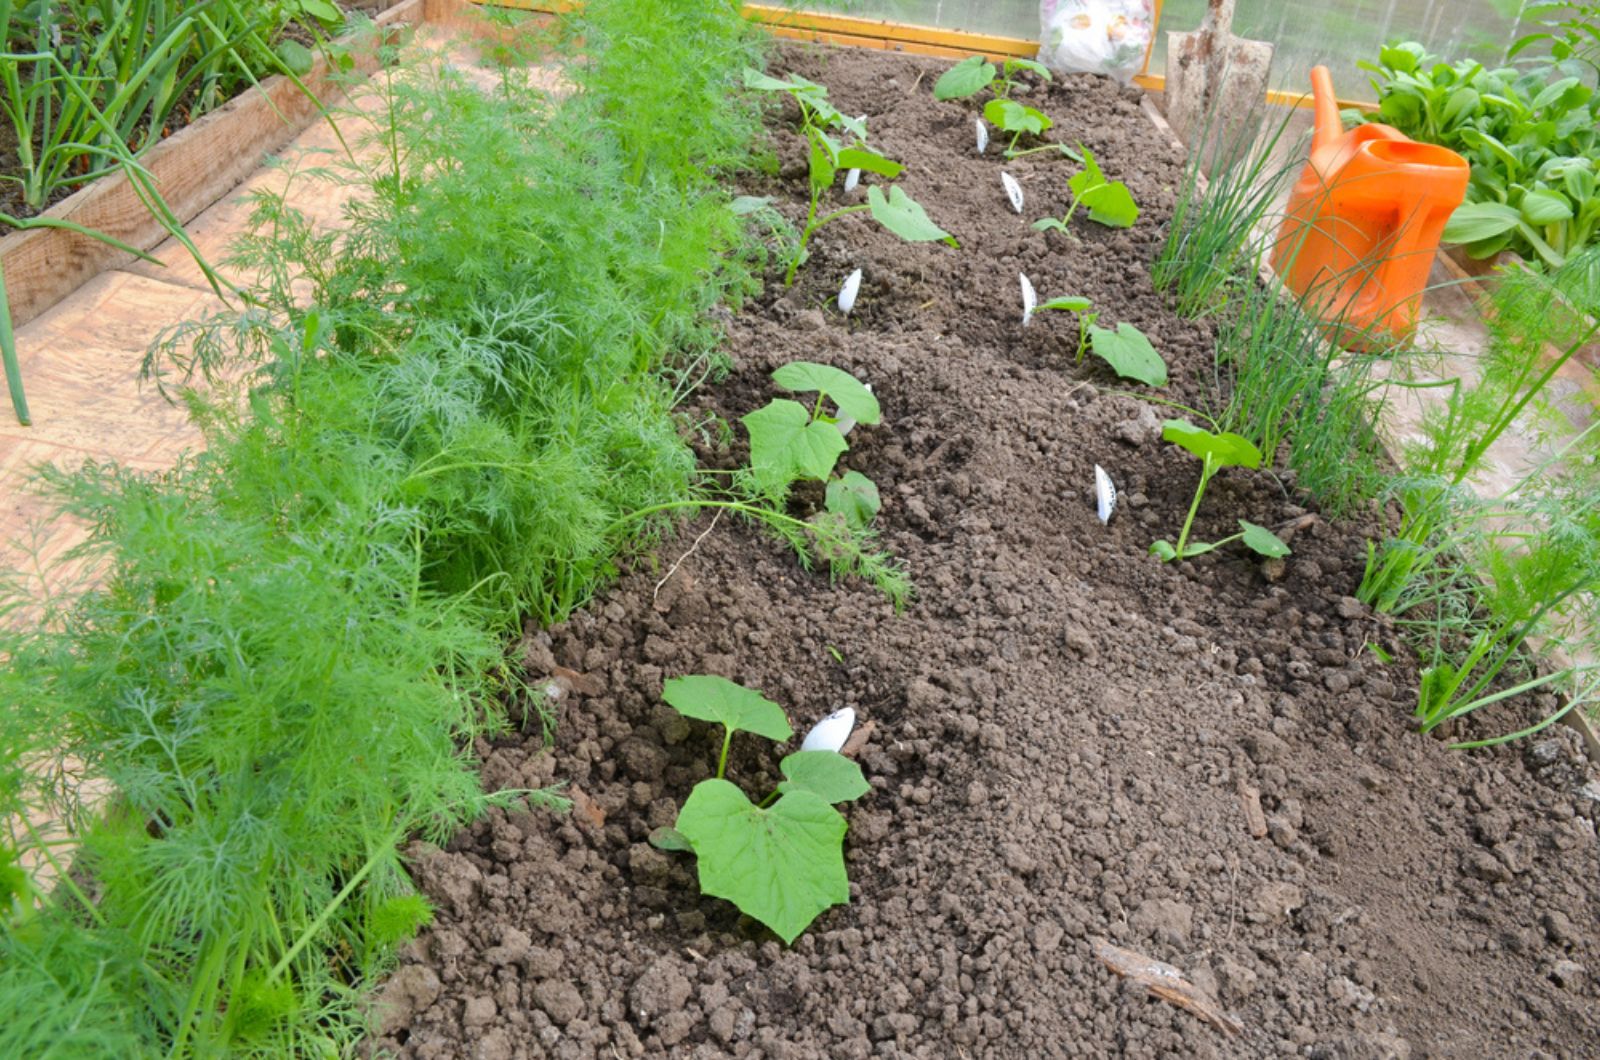 dill and cucumber growing together in garden